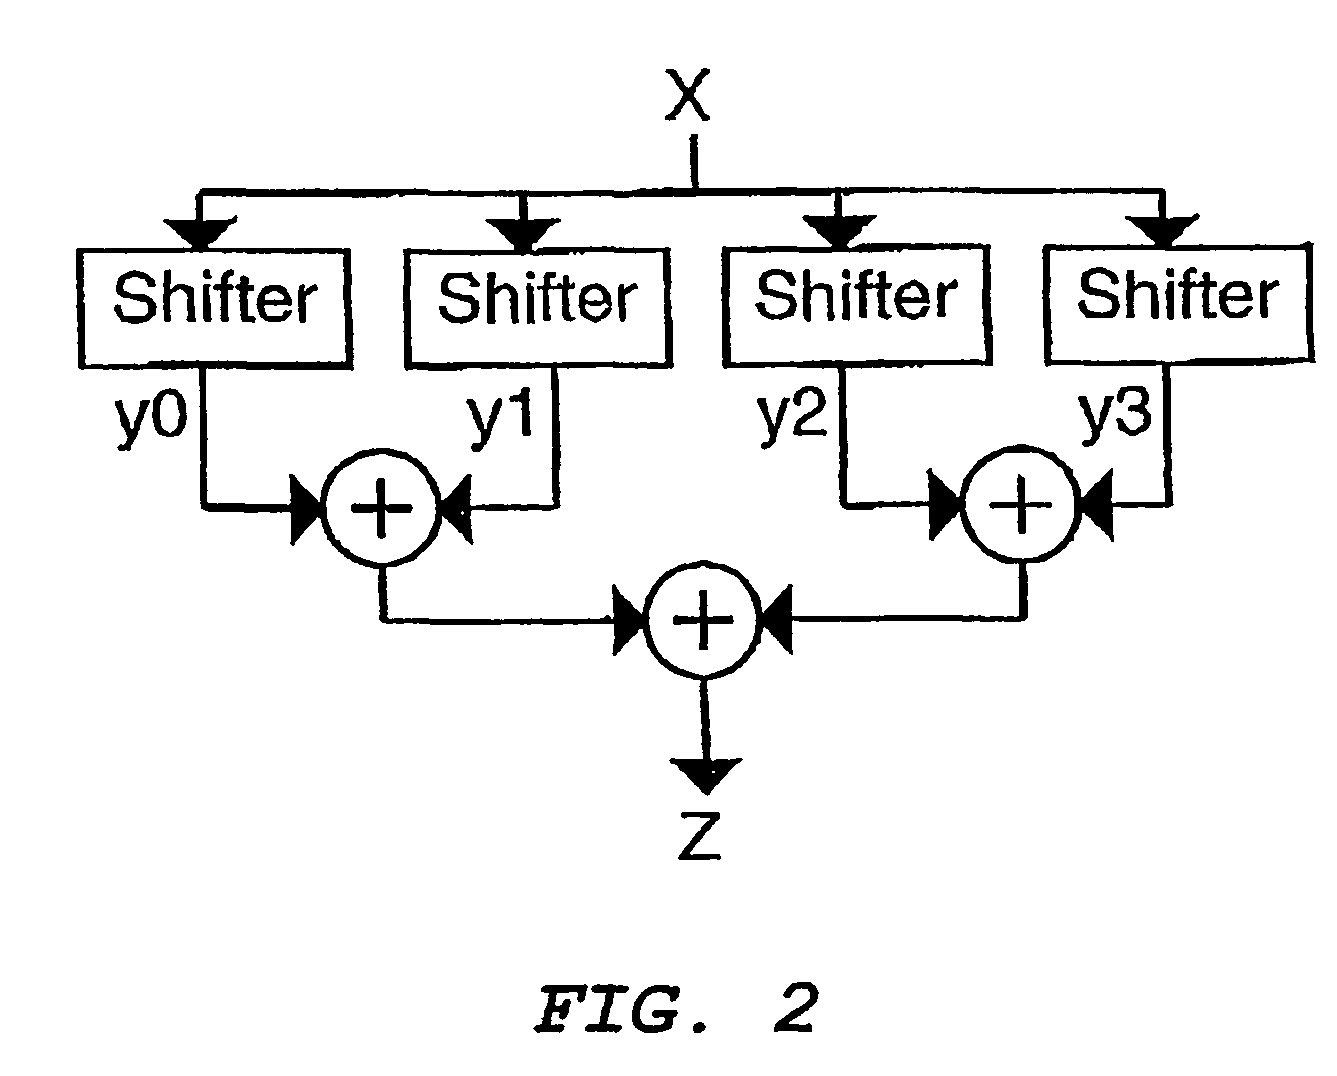 Multiplier and shift device using signed digit representation